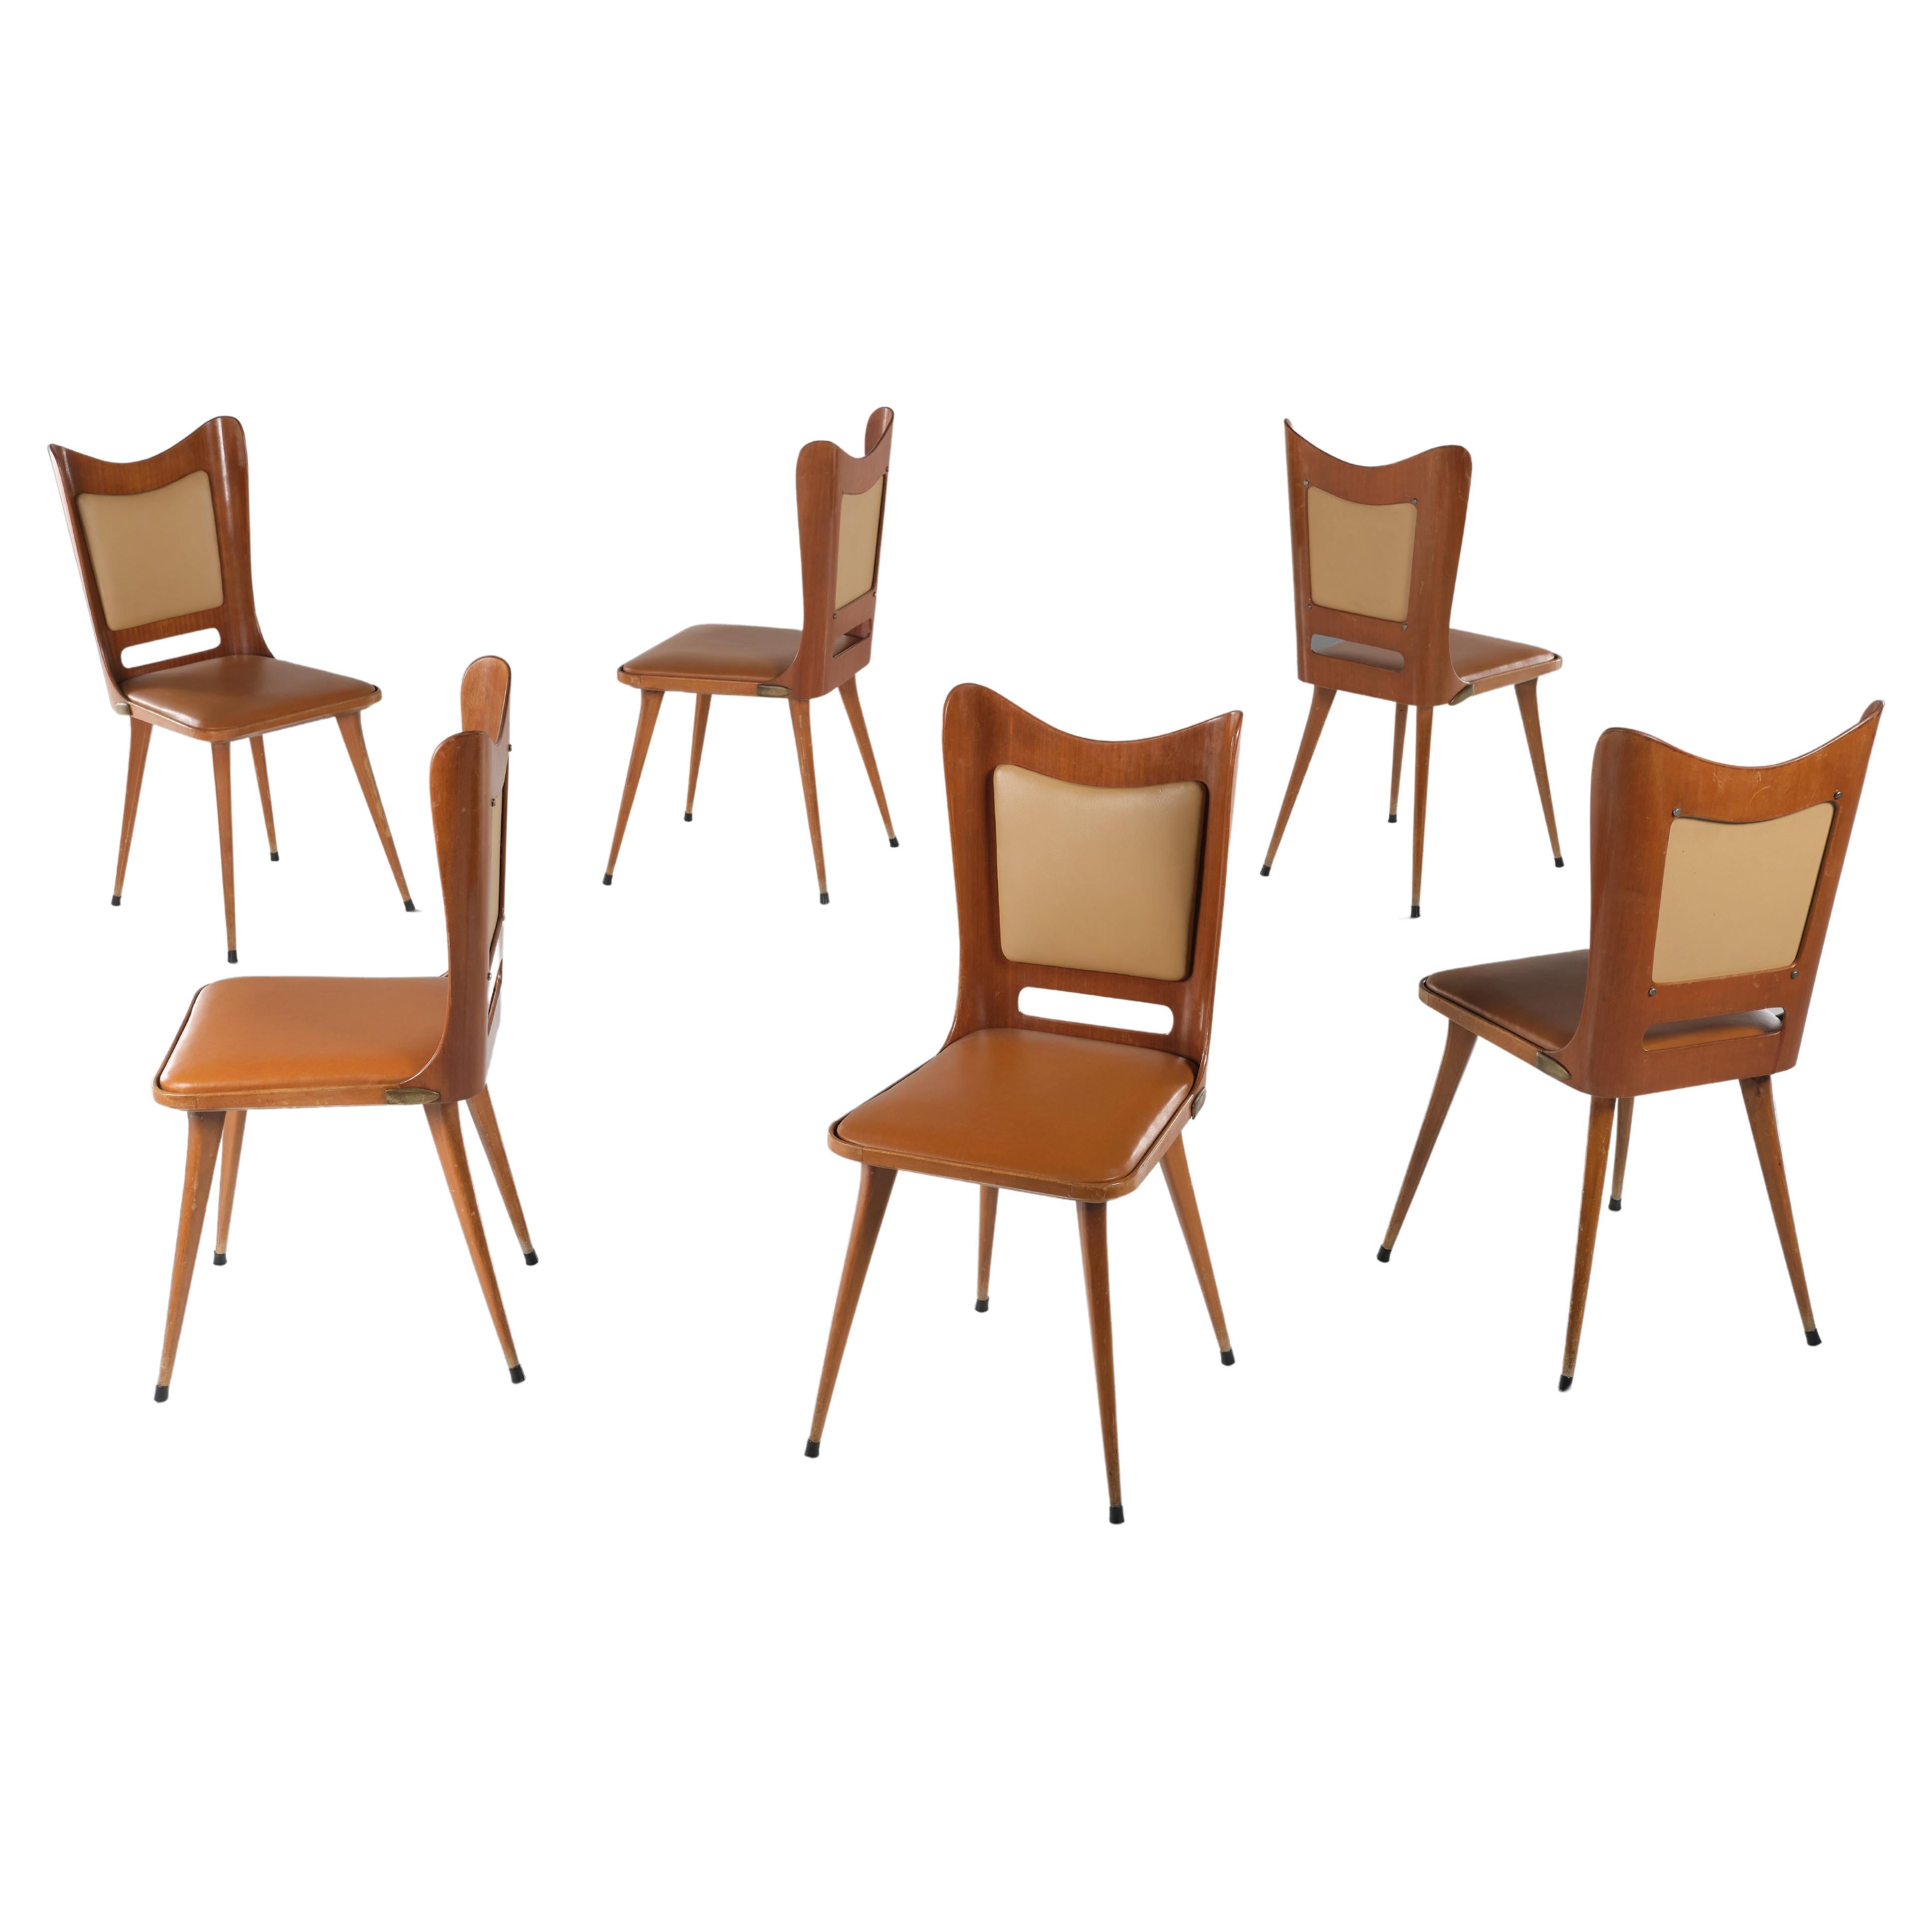 Carlo Ratti Set of 6 Chairs Wood Plywood and Faux Leather, Italian Design 1950s For Sale